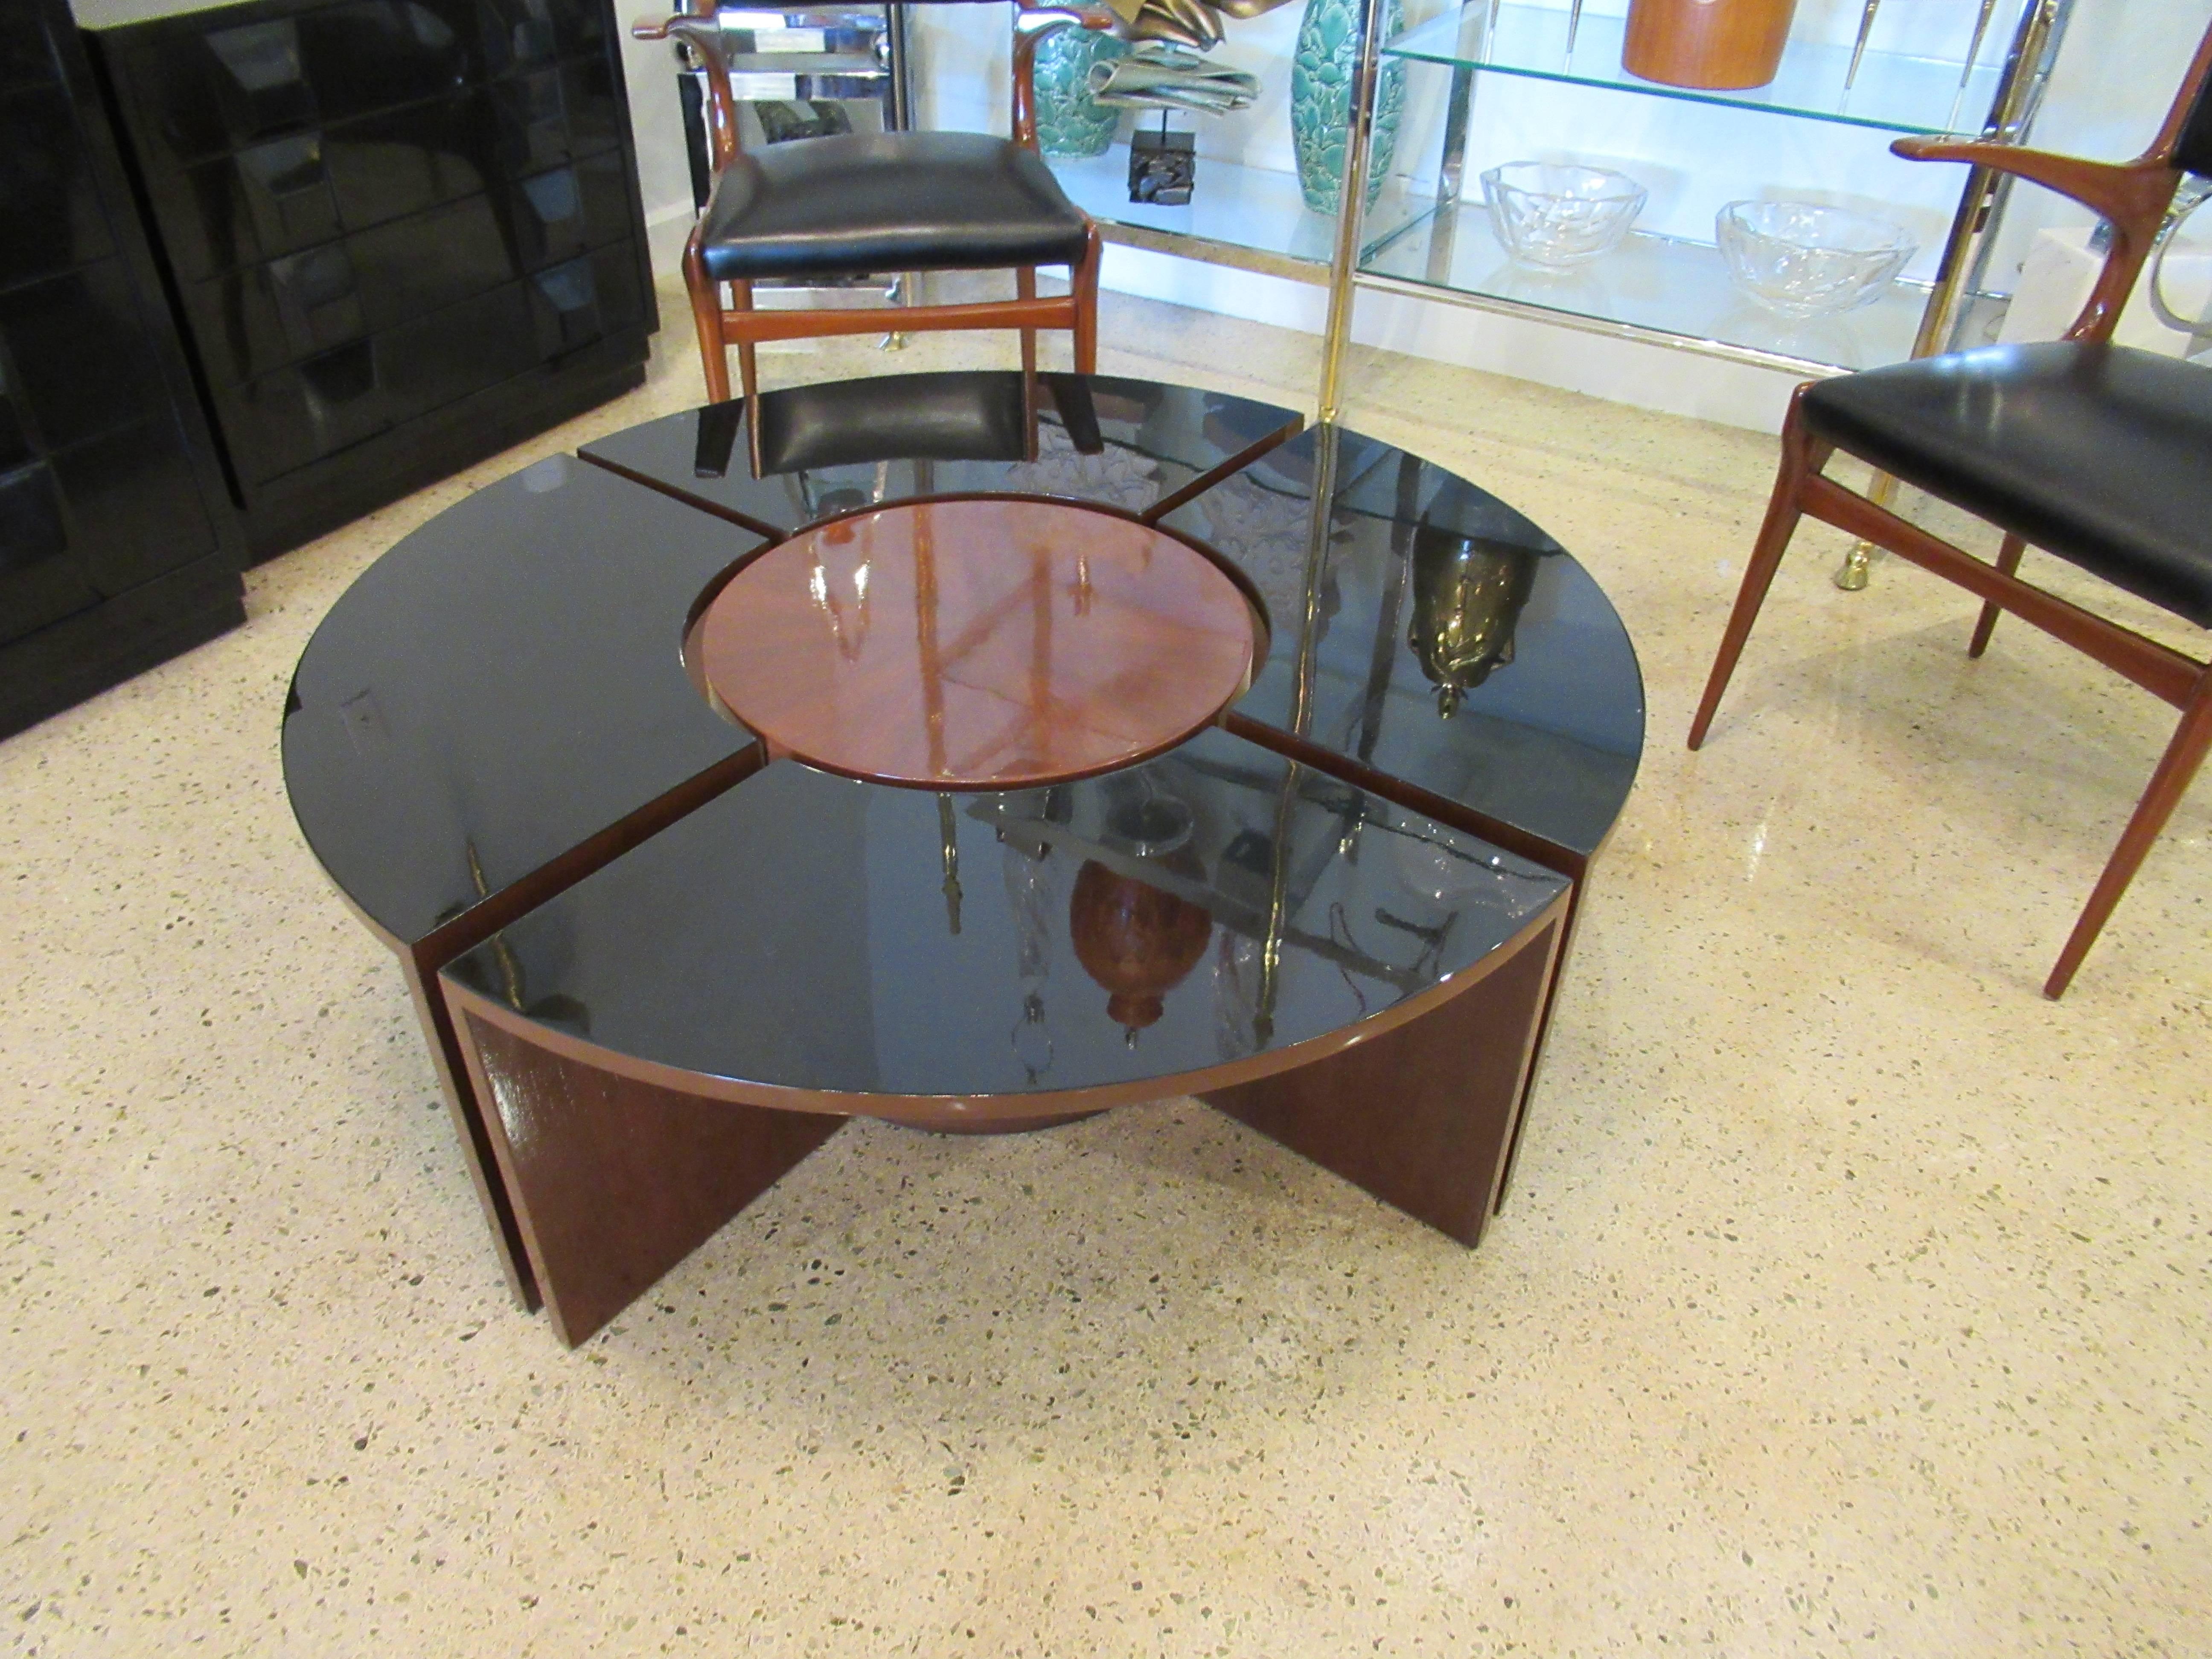 One of the original working prototypes of the 2 piece table that was put into production, this table can be configured in many different ways- from the collection of dennis hopper.

